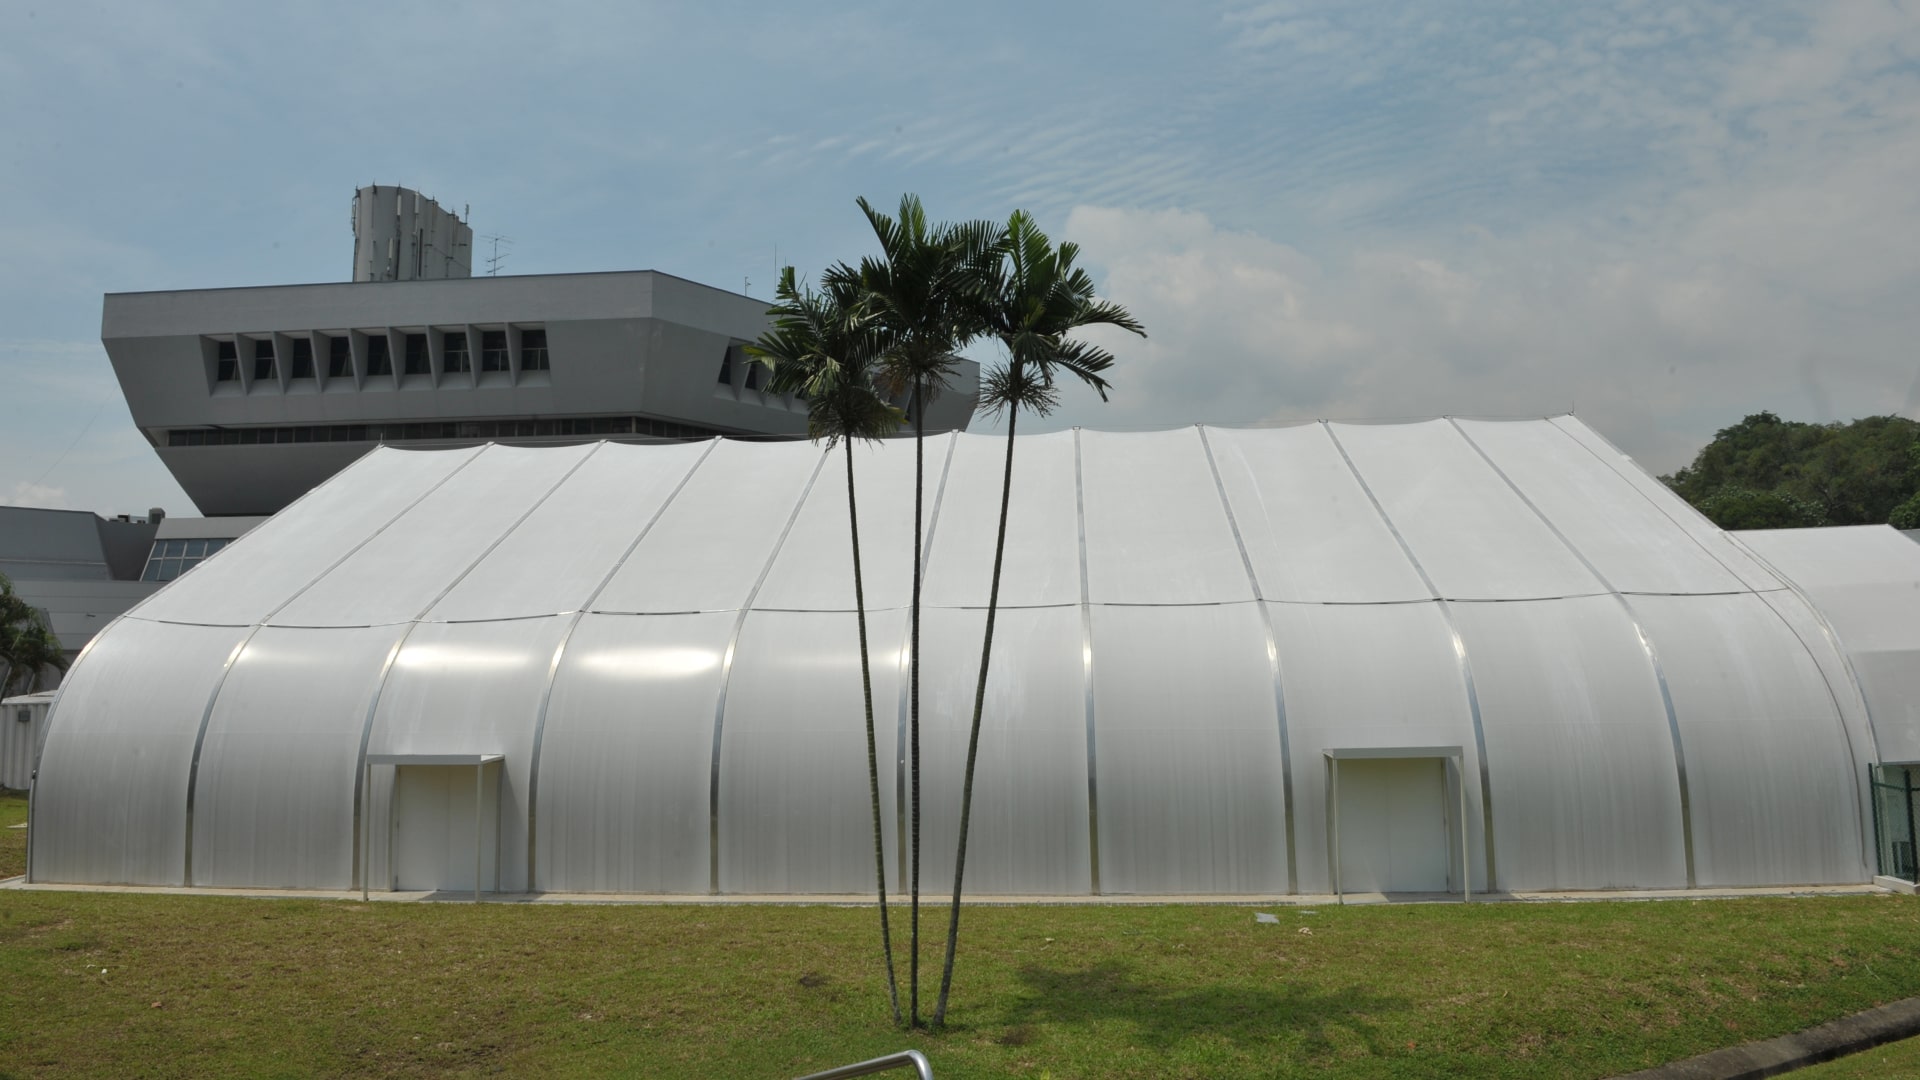 tsc_opt-images_mega-structures_singapore-science-center-marquee-1920x1080-01-min